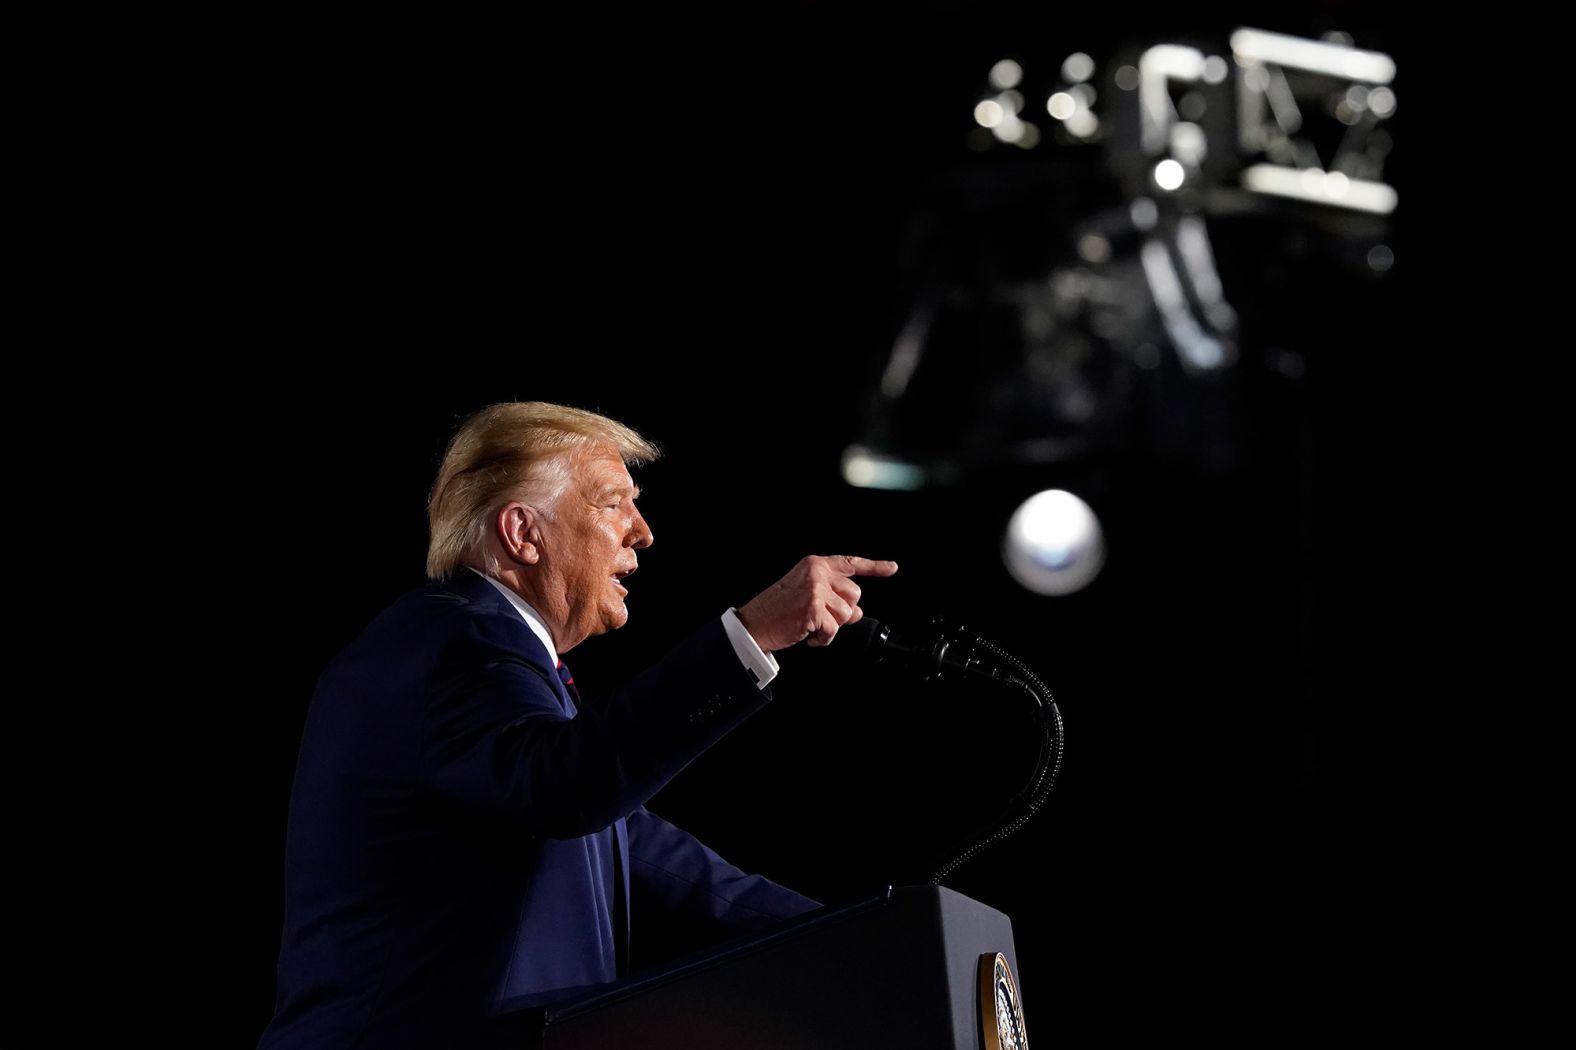 In his speech, Trump claimed that the November election would decide whether "we save the American dream or whether we allow a socialist agenda to demolish our cherished destiny."